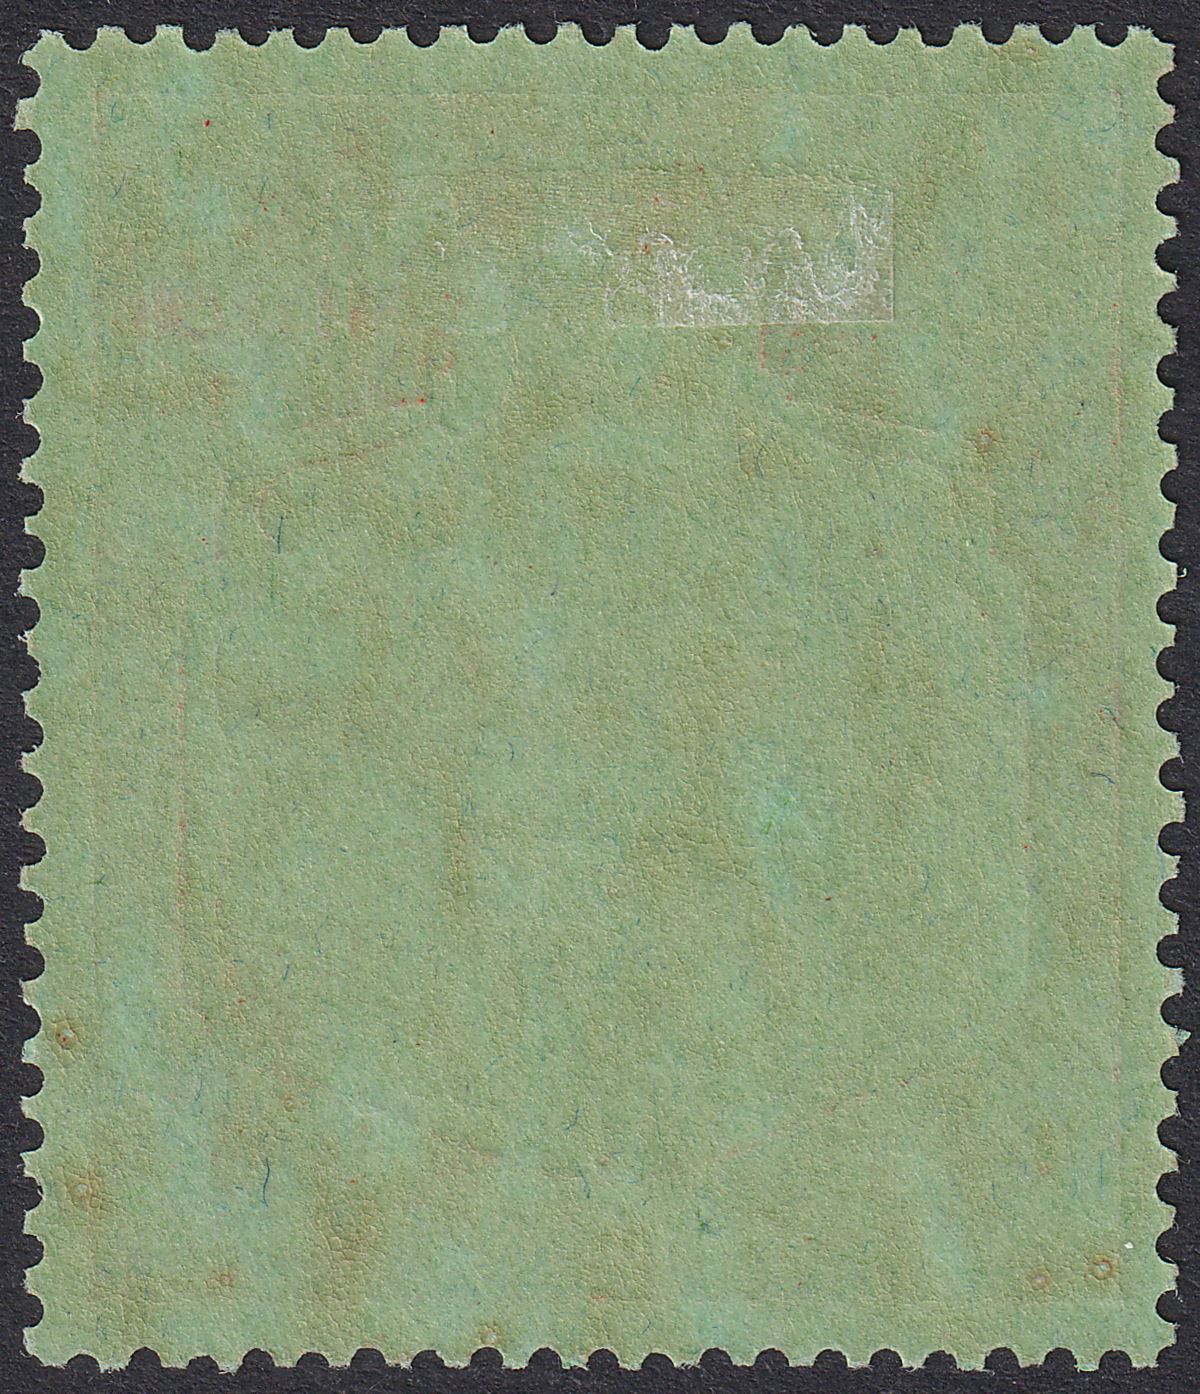 Bermuda 1944 KGVI 10sh Dull Green and Brown Red on Green p14 Mint SG119c